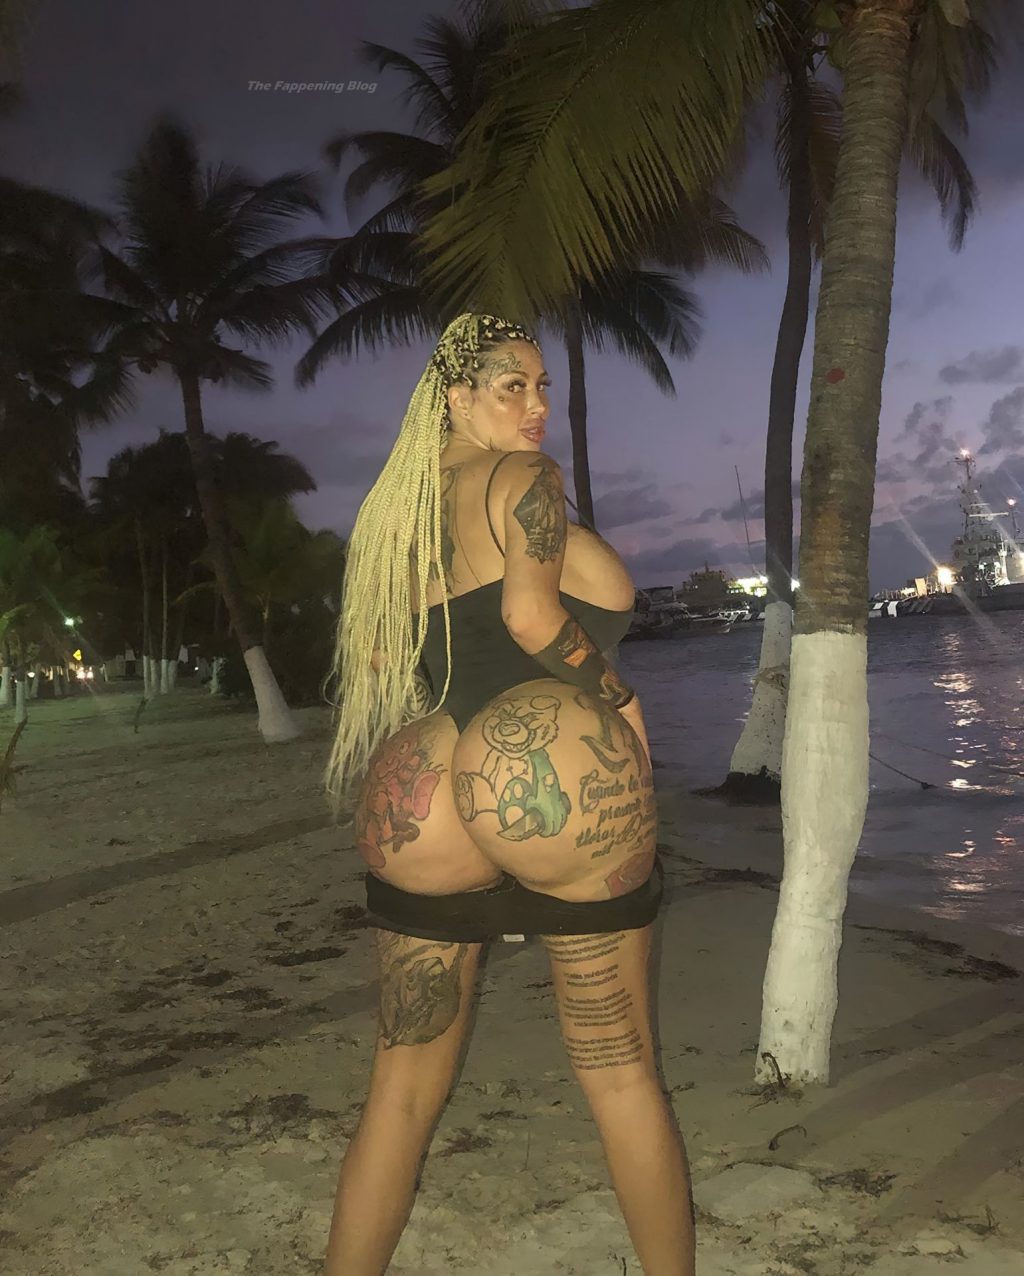 Mary Magdalene Unveils Full Bum Tattoo After Splashing Out Thousands On Butt Lift (33 Photos)